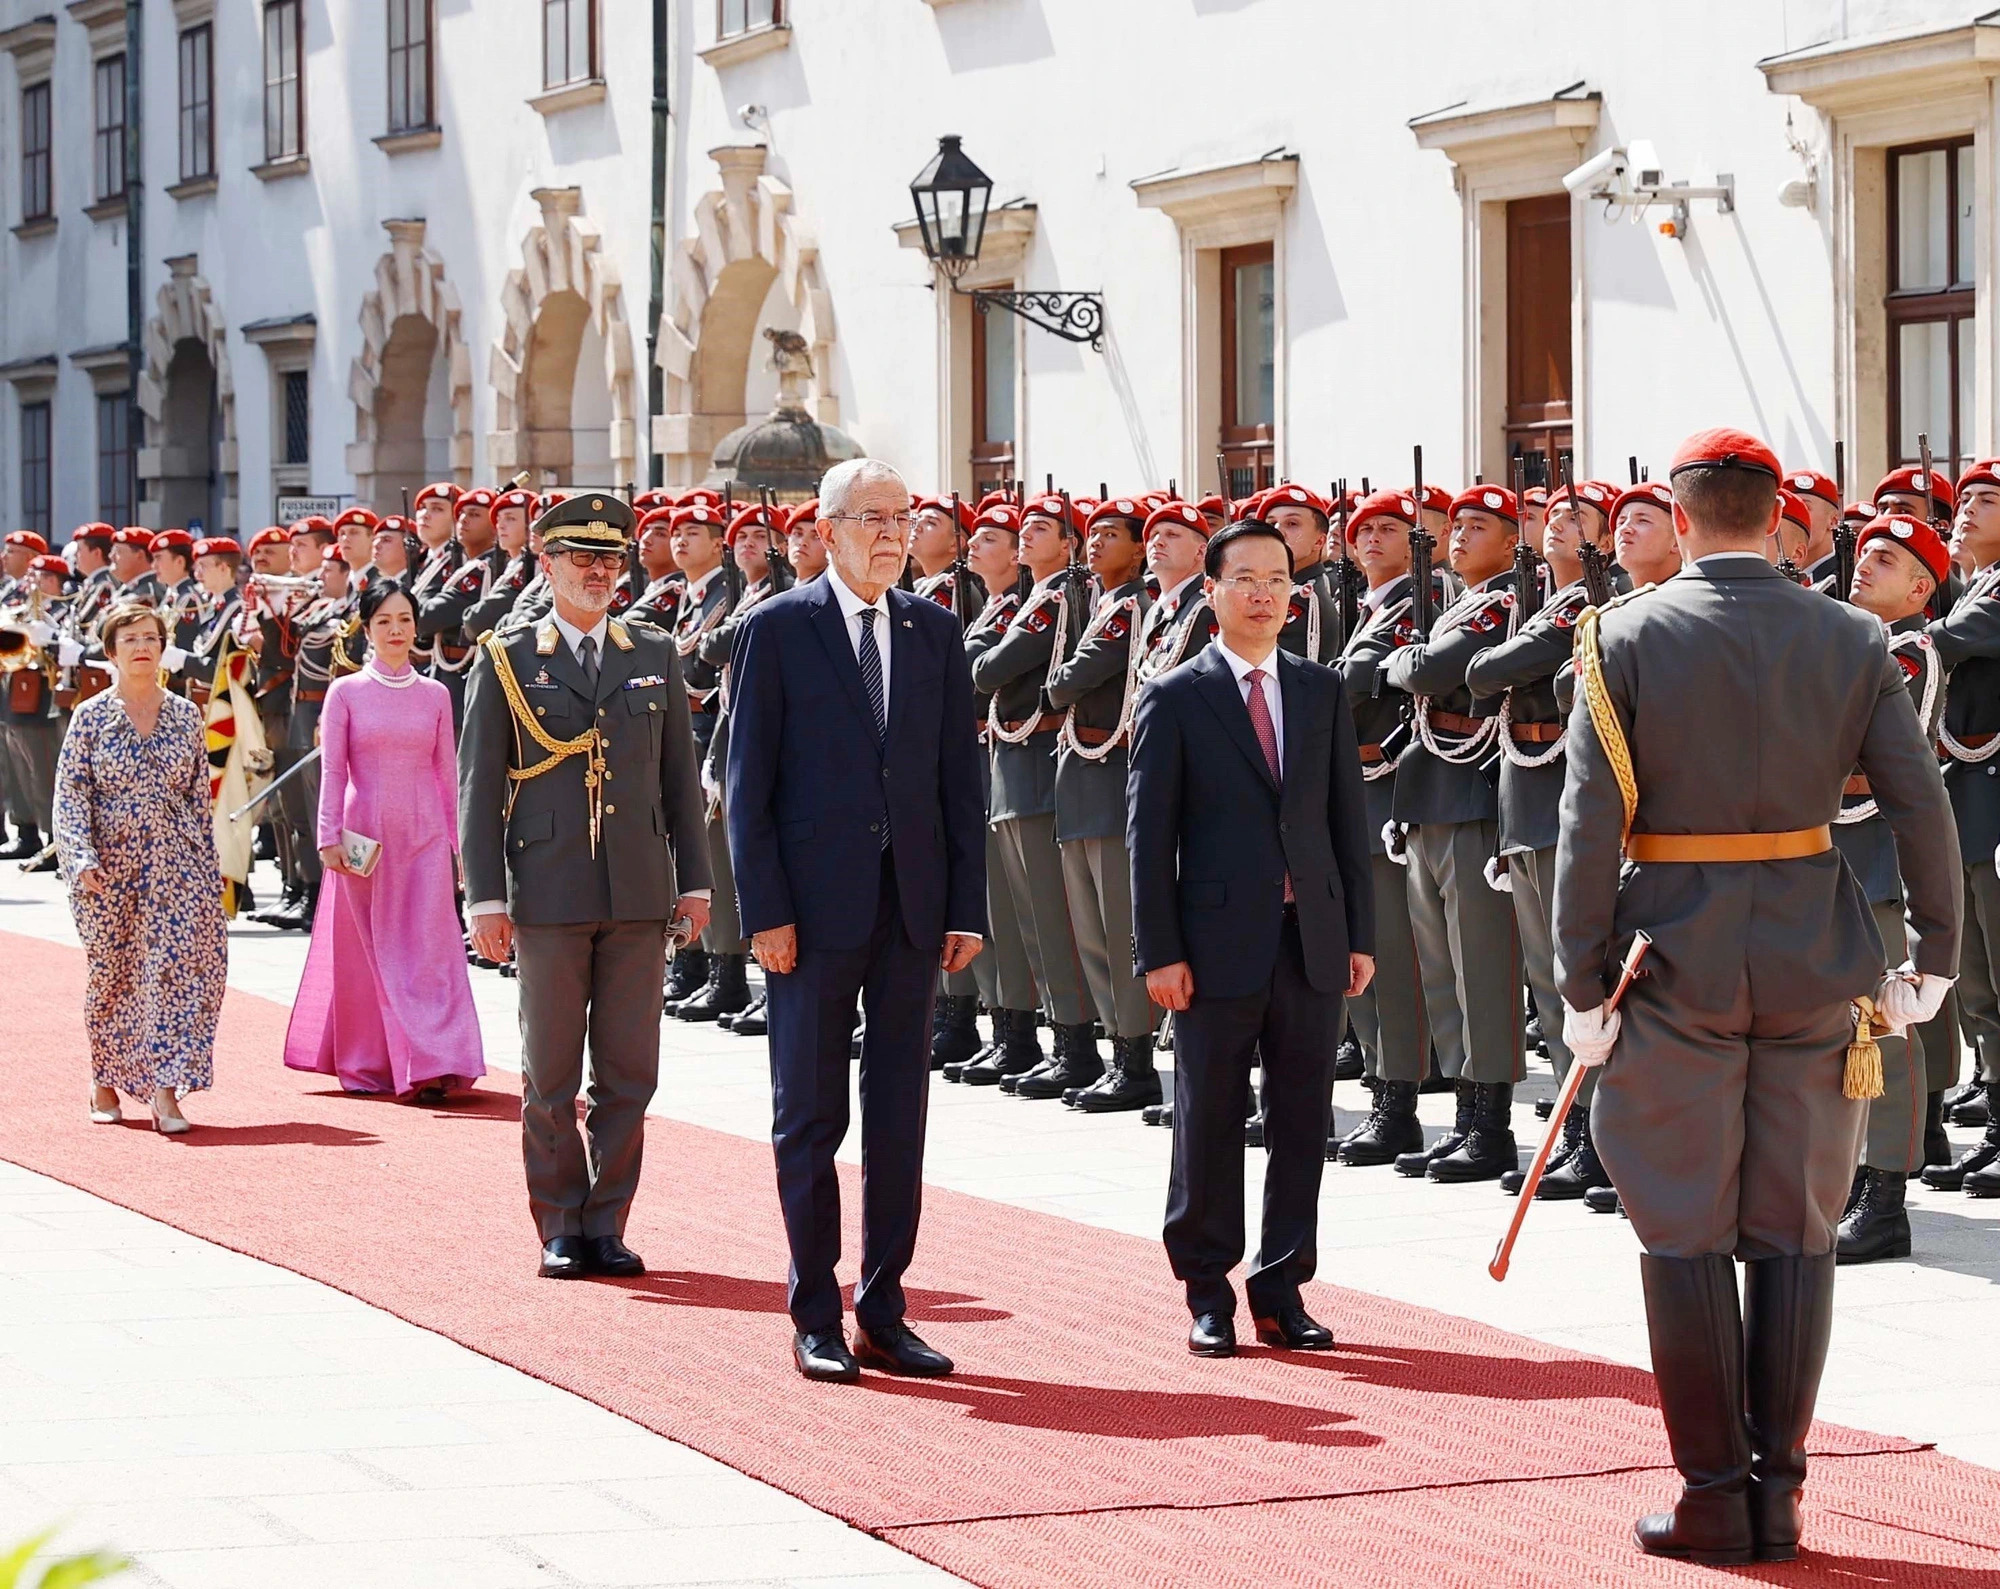 This is the first visit to Austria by a Vietnamese state president in the past 15 years and President Vo Van Thuong’s first official visit to an EU nation. Photo: Vietnam News Agency